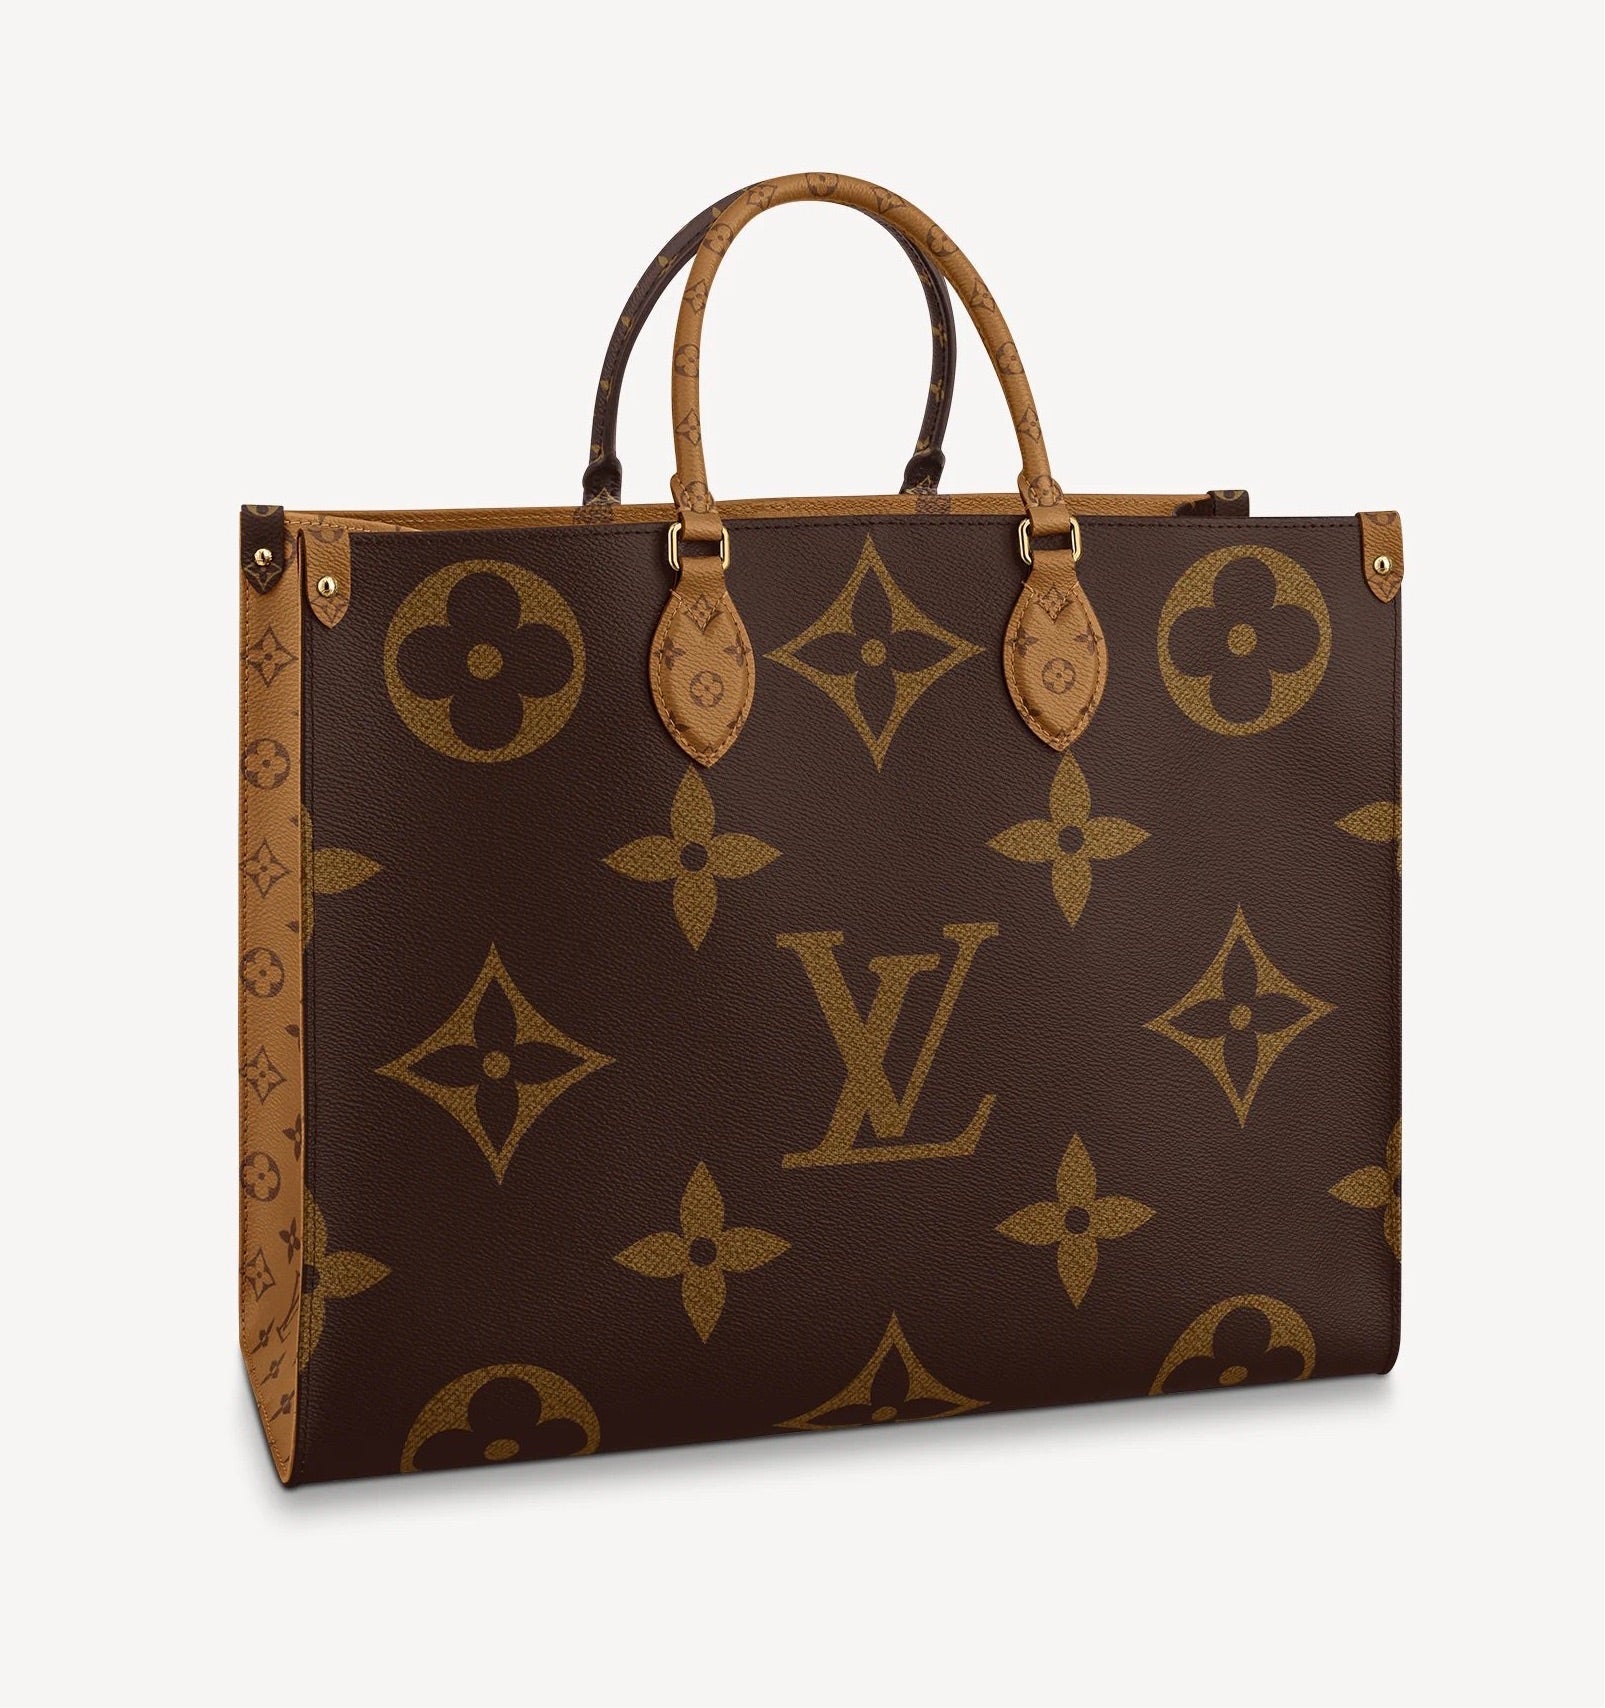 LOUIS VUITTON EMPREINTE ON THE GO TOTE EAST WEST LOUIS VUITTON FALL RELEASE  #marquitalvluxury #luxxe 